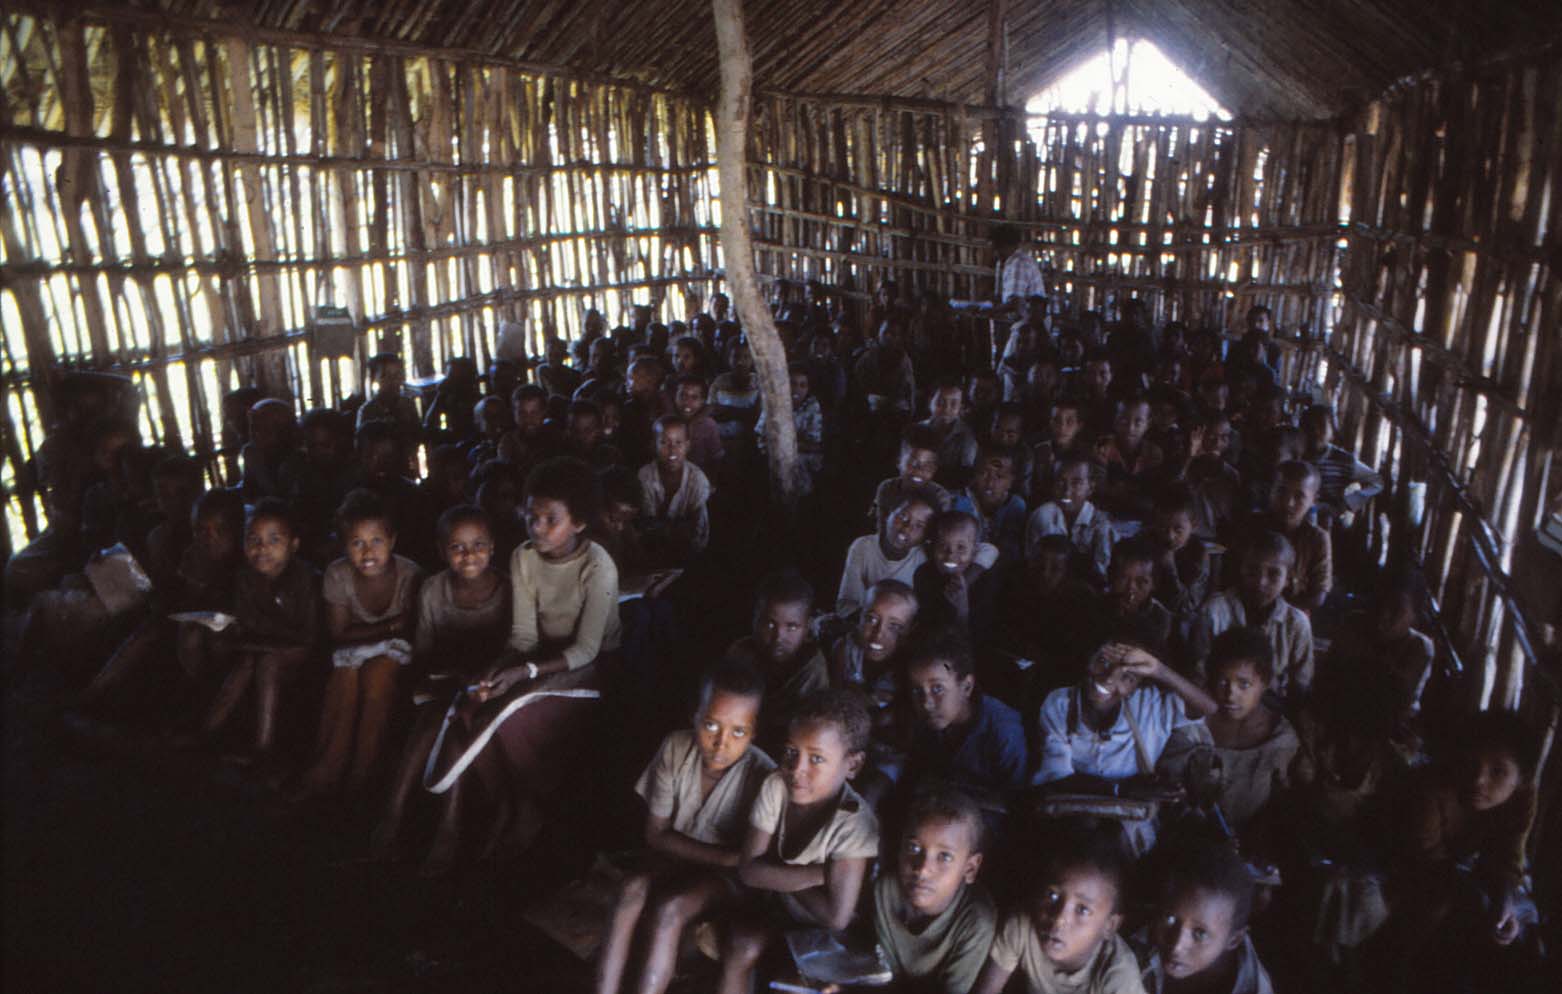 Schools in Ethiopia | Letter from Lund1562 x 994